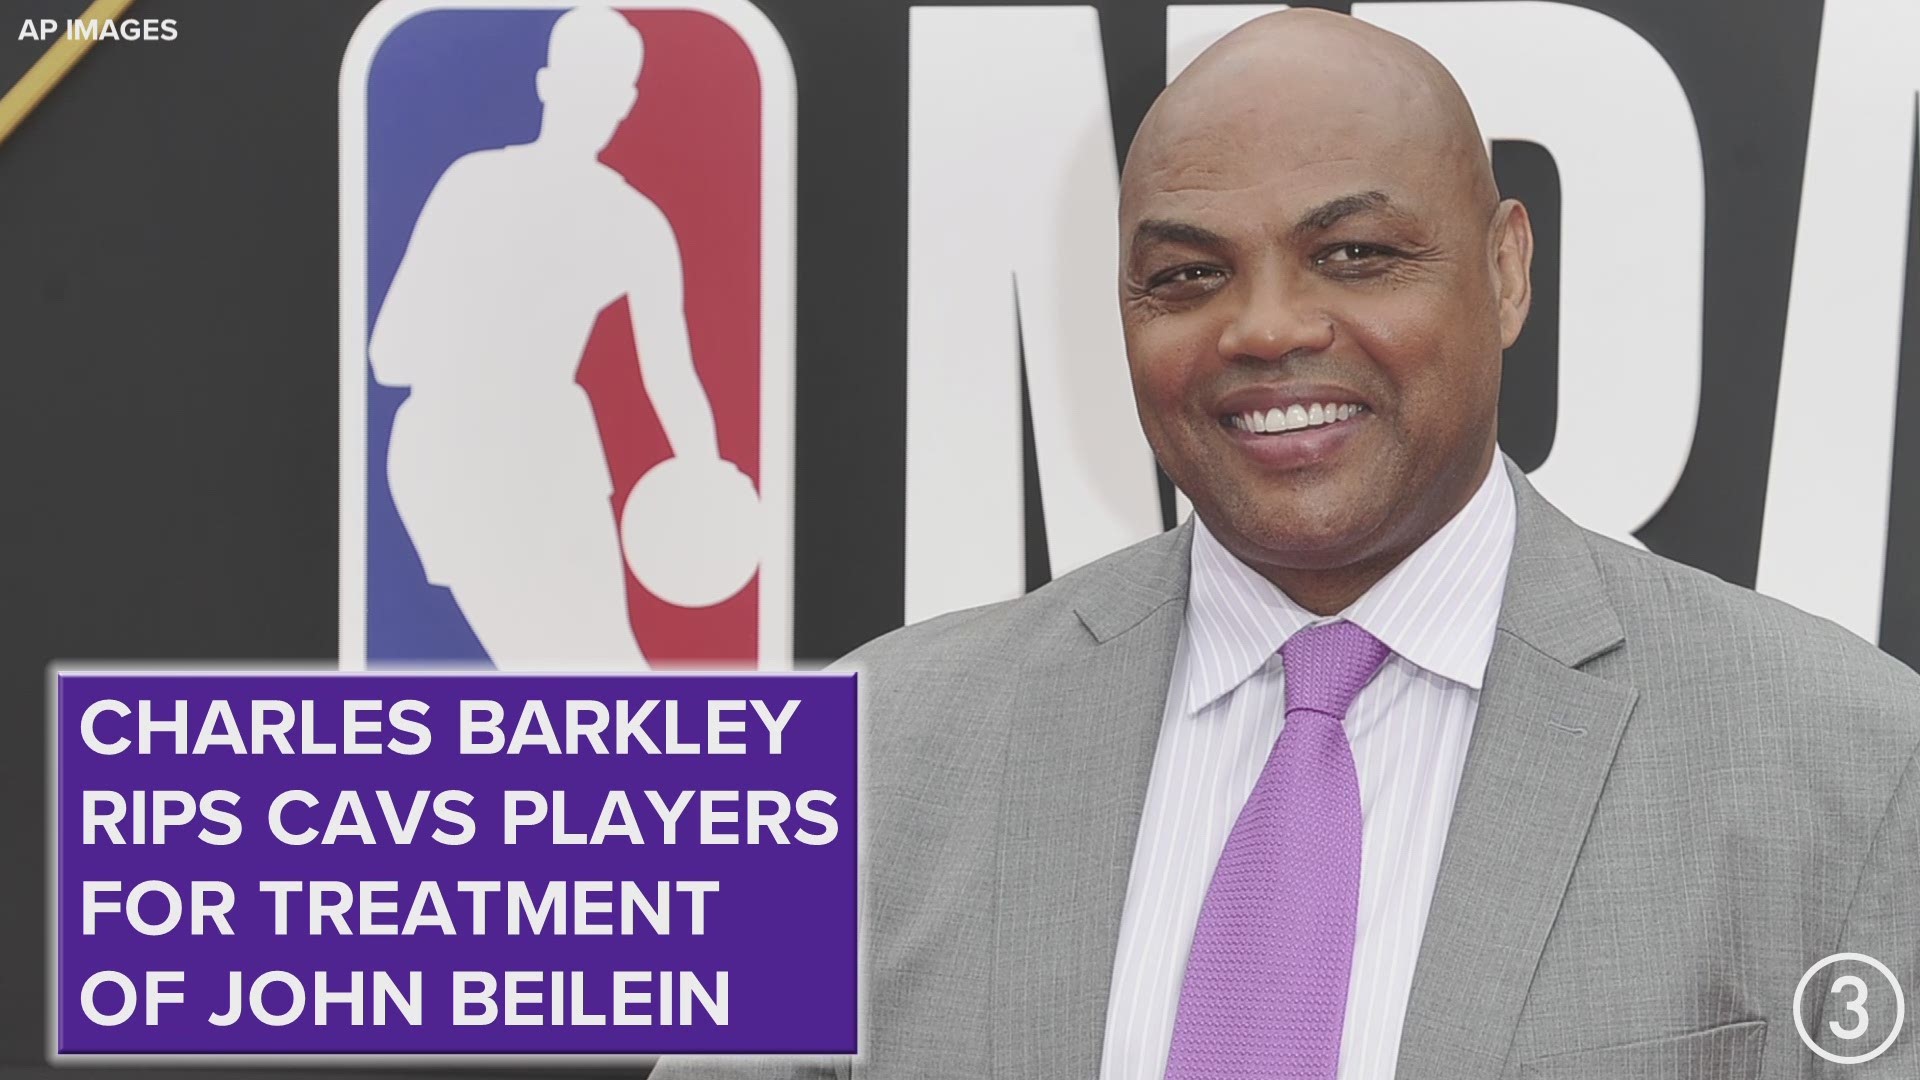 Chuck rips Cavs!  Speaking on TNT's Inside the NBA, Charles Barkley weighed in on John Beilein's departure as Cleveland Cavaliers head coach.